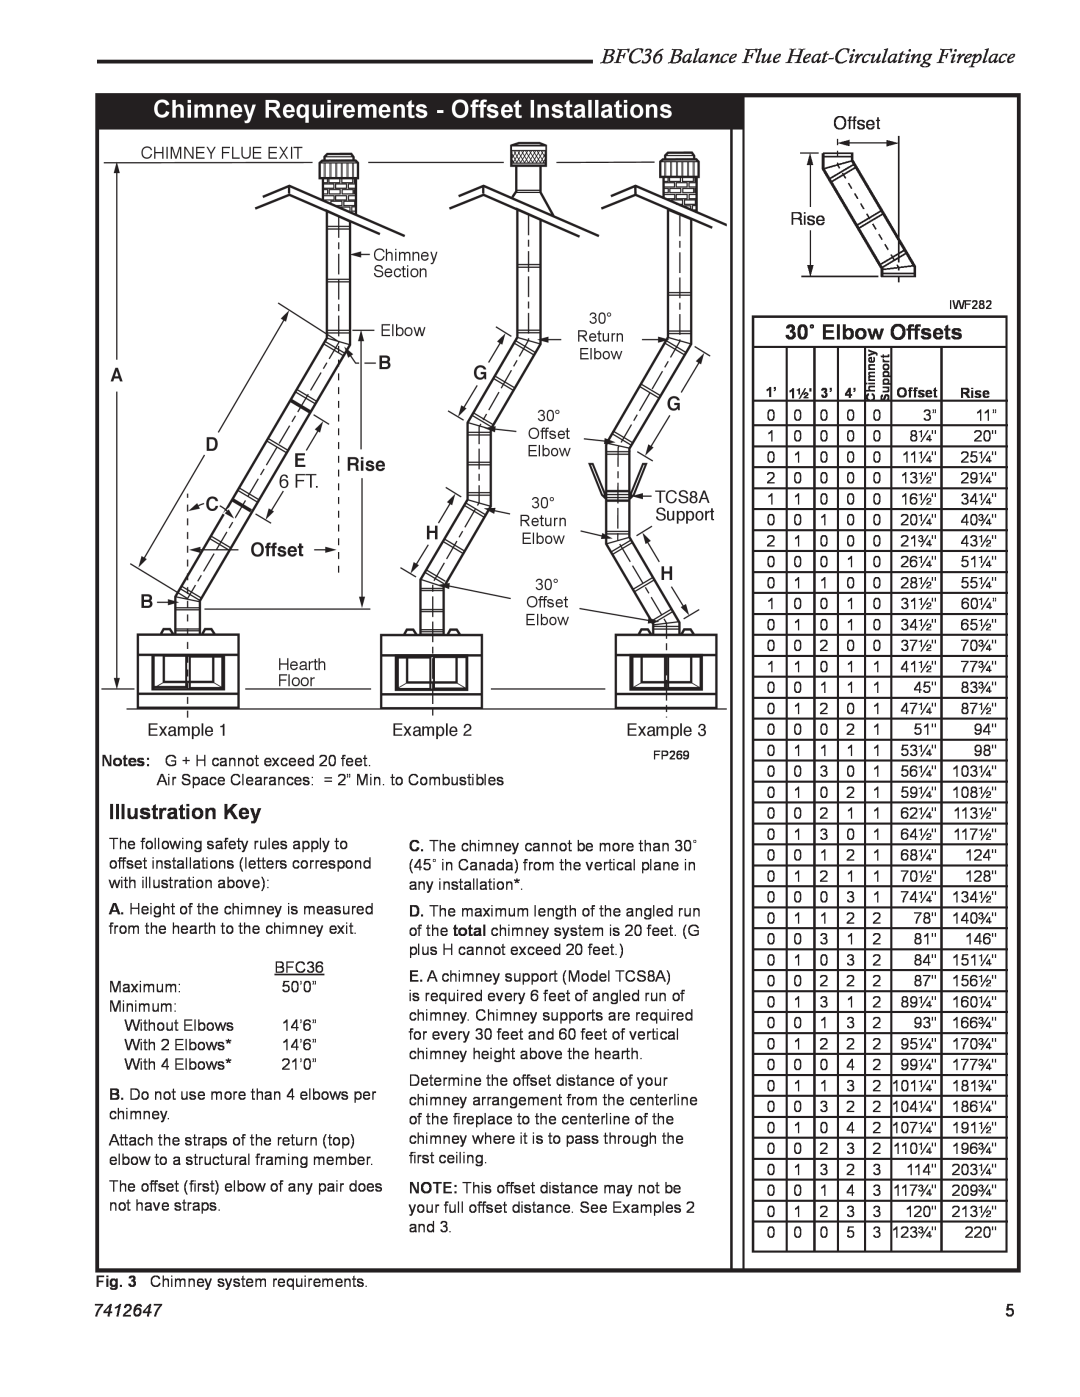 Vermont Casting BFC36 manual Chimney Requirements - Offset Installations, 30˚ Elbow Offsets, Illustration Key, Rise, 6 FT 